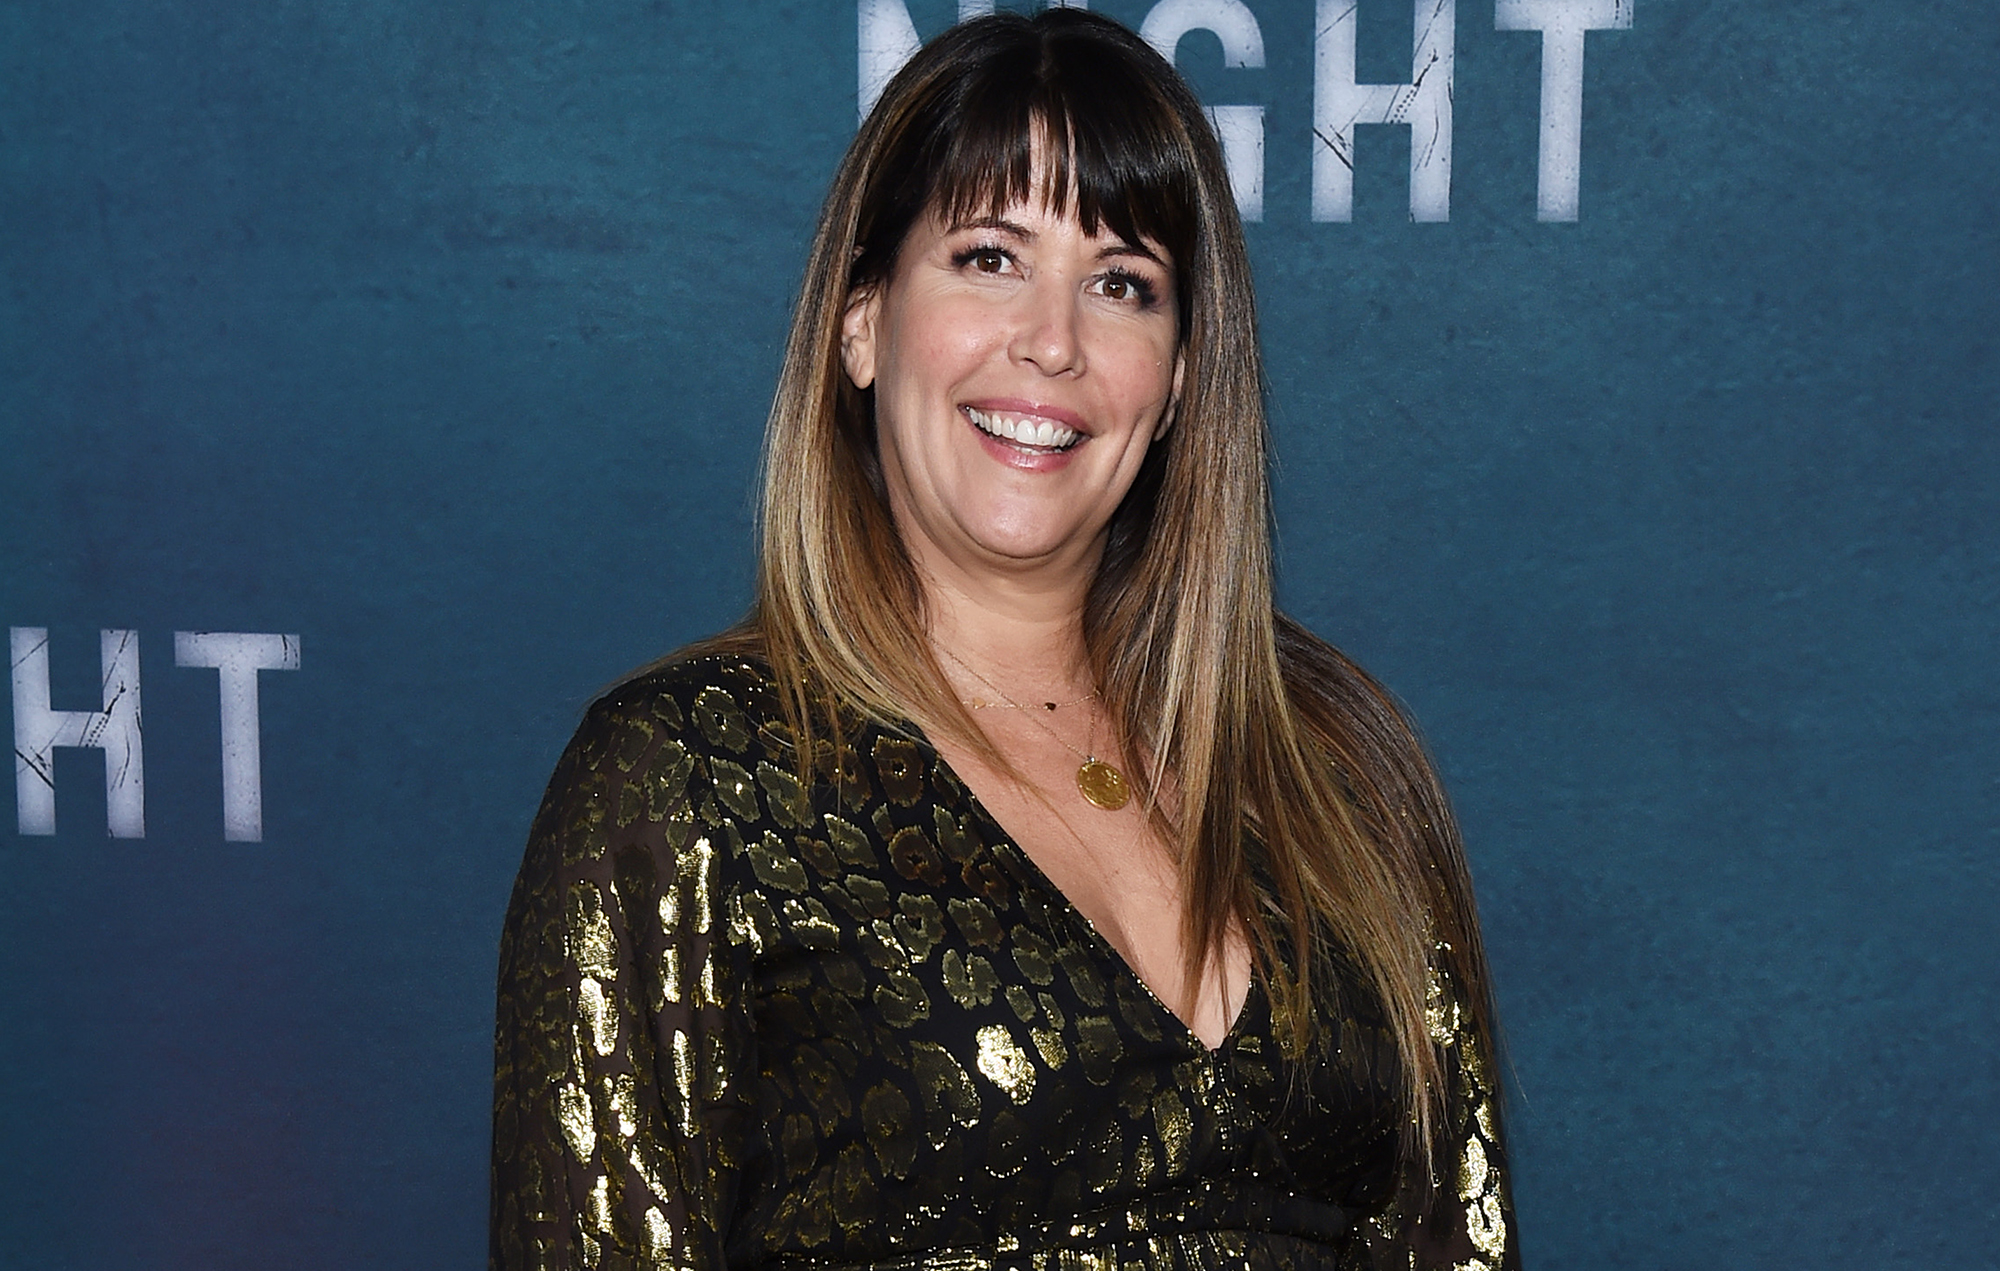 Director Patty Jenkins to direct the new Star Wars movie

